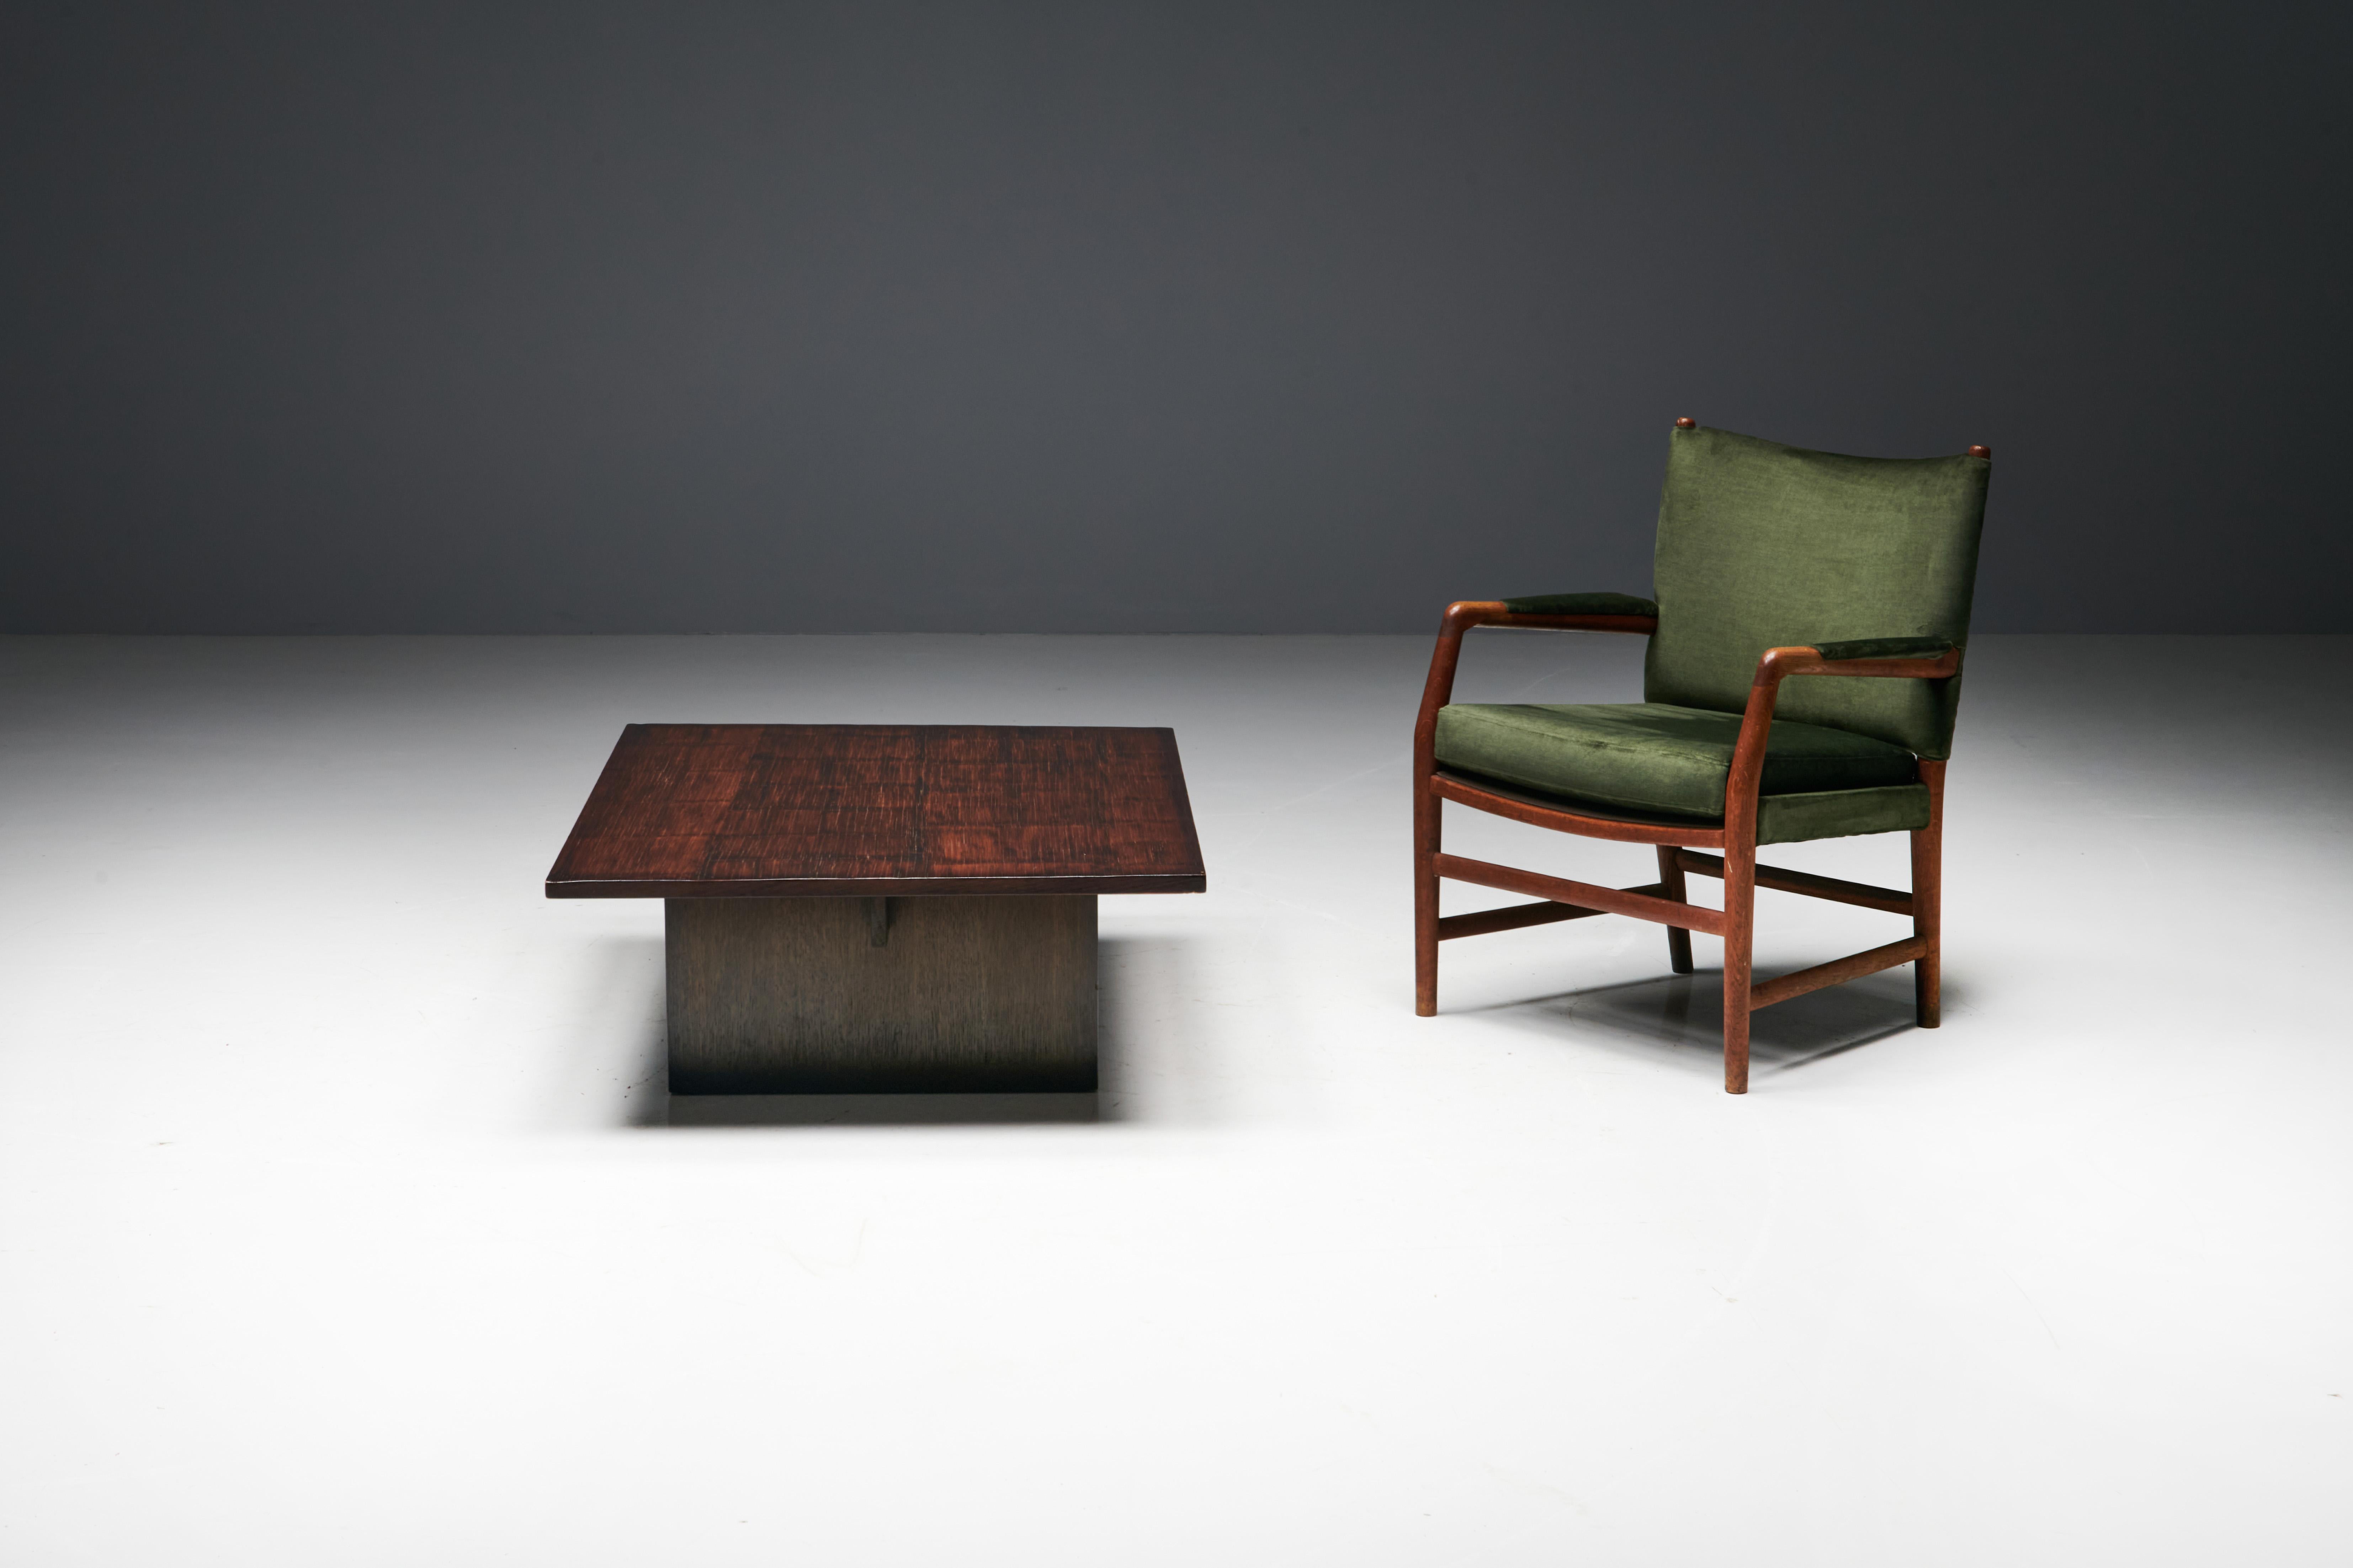 Japonisme Coffee Table by Axel Vervoordt in Wenge and Bamboo, Belgium, 1980s